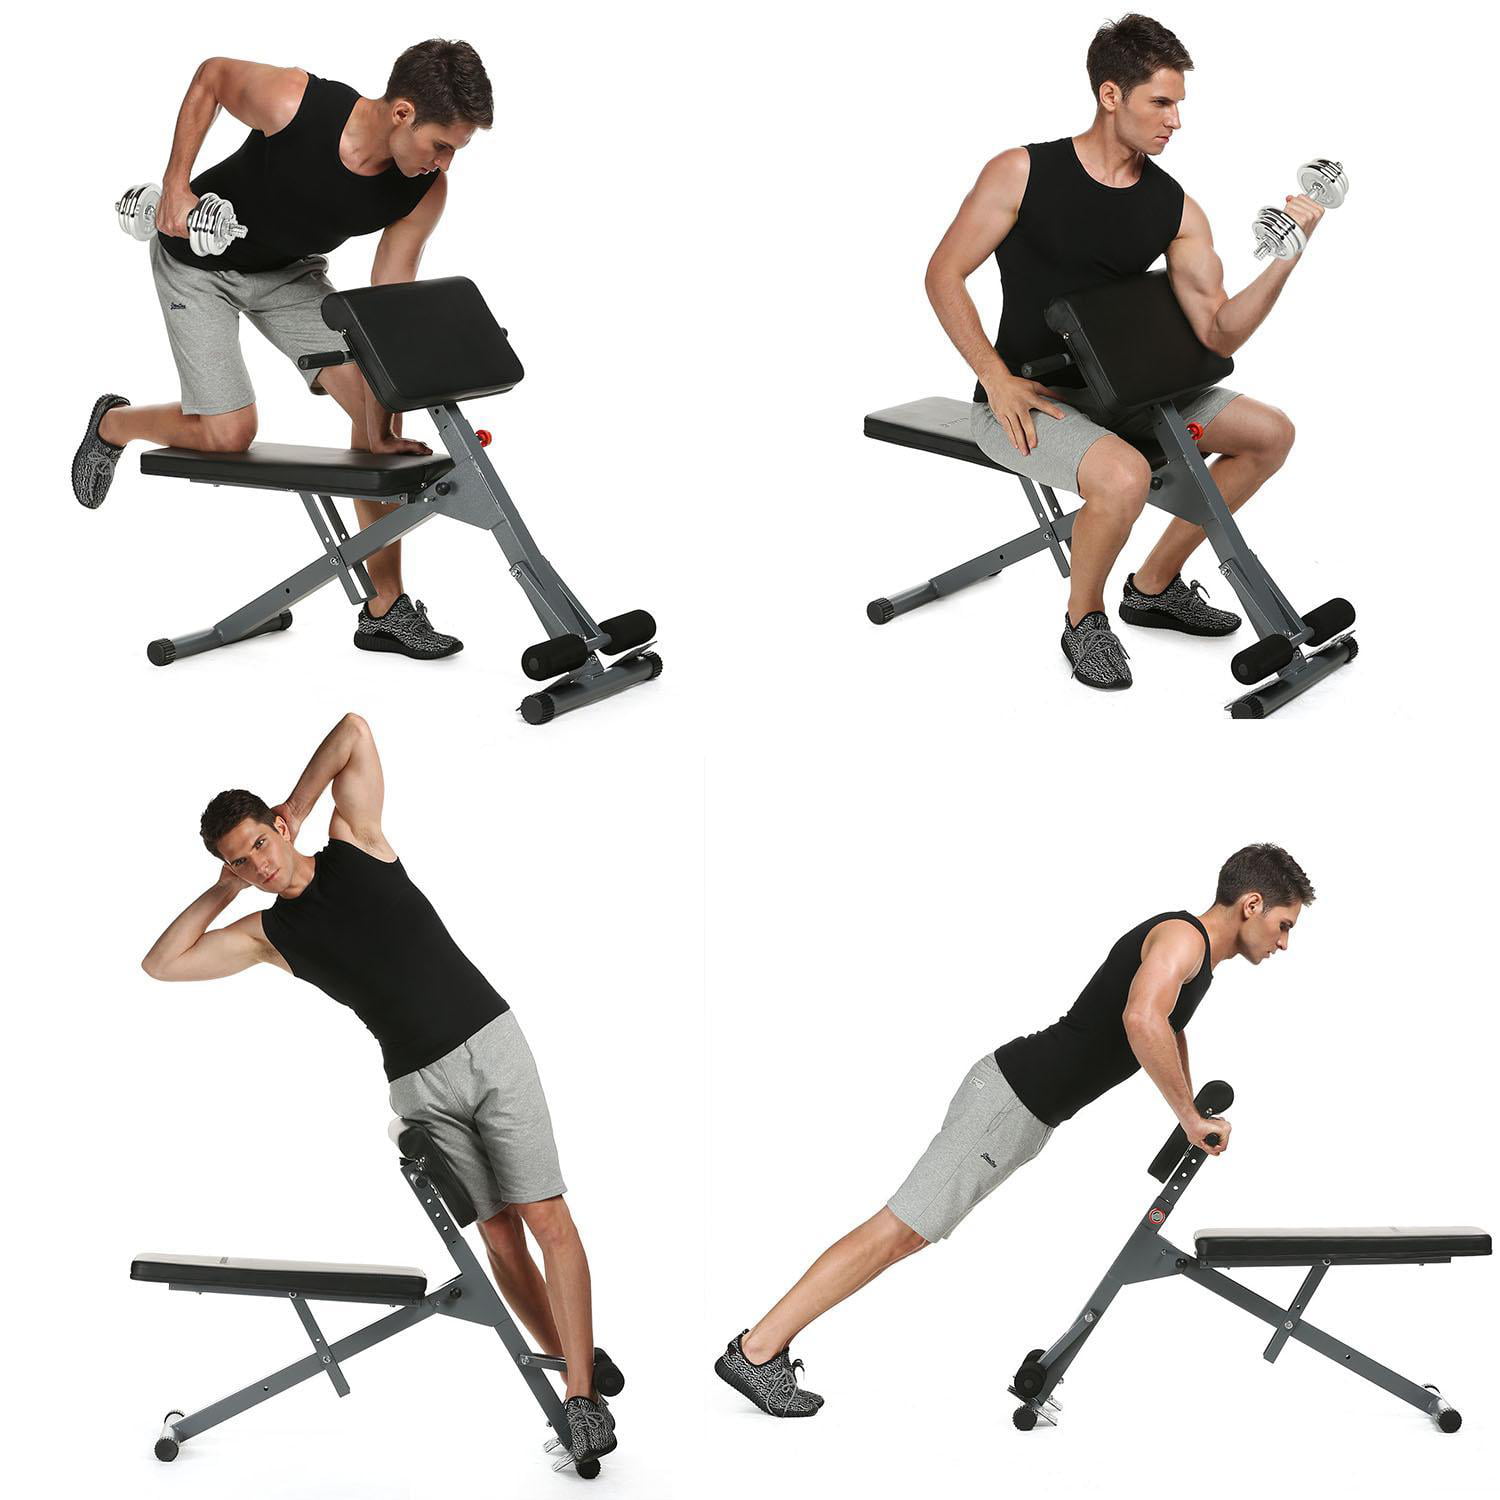 Details about   Adjustable Dumbbell Weight Bench Fitness Incline Decline Foldable Workout Gym 